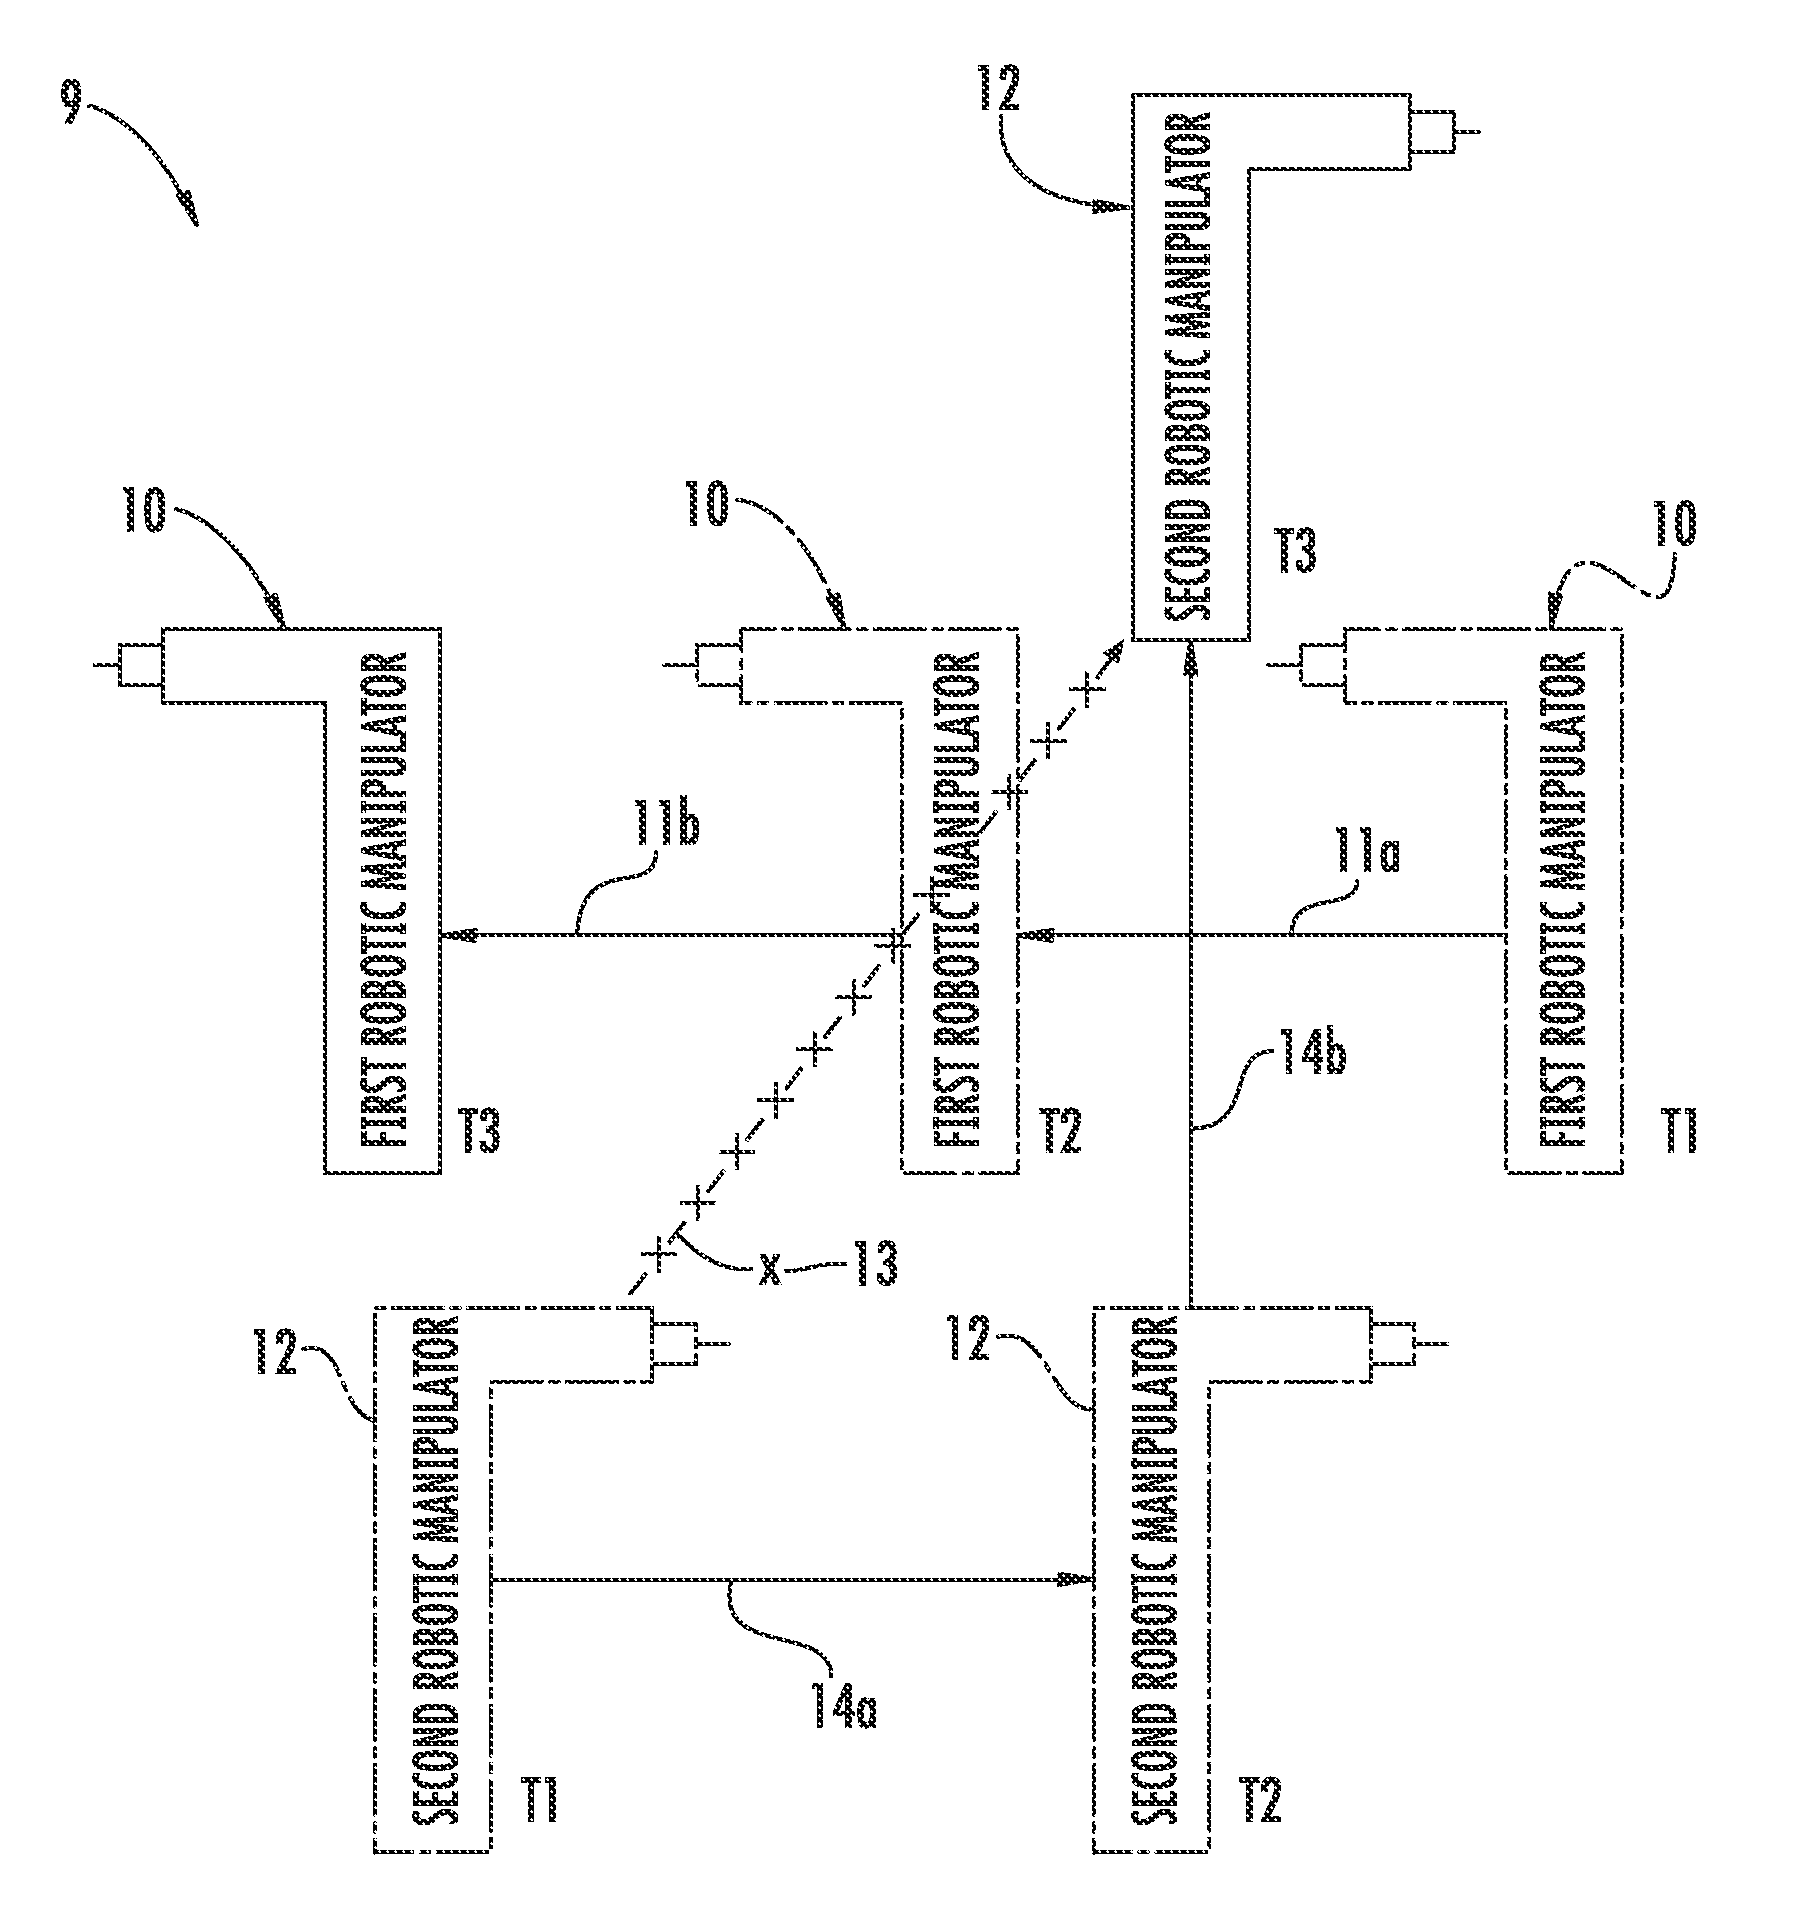 Robotic apparatus implementing collision avoidance scheme and associated methods